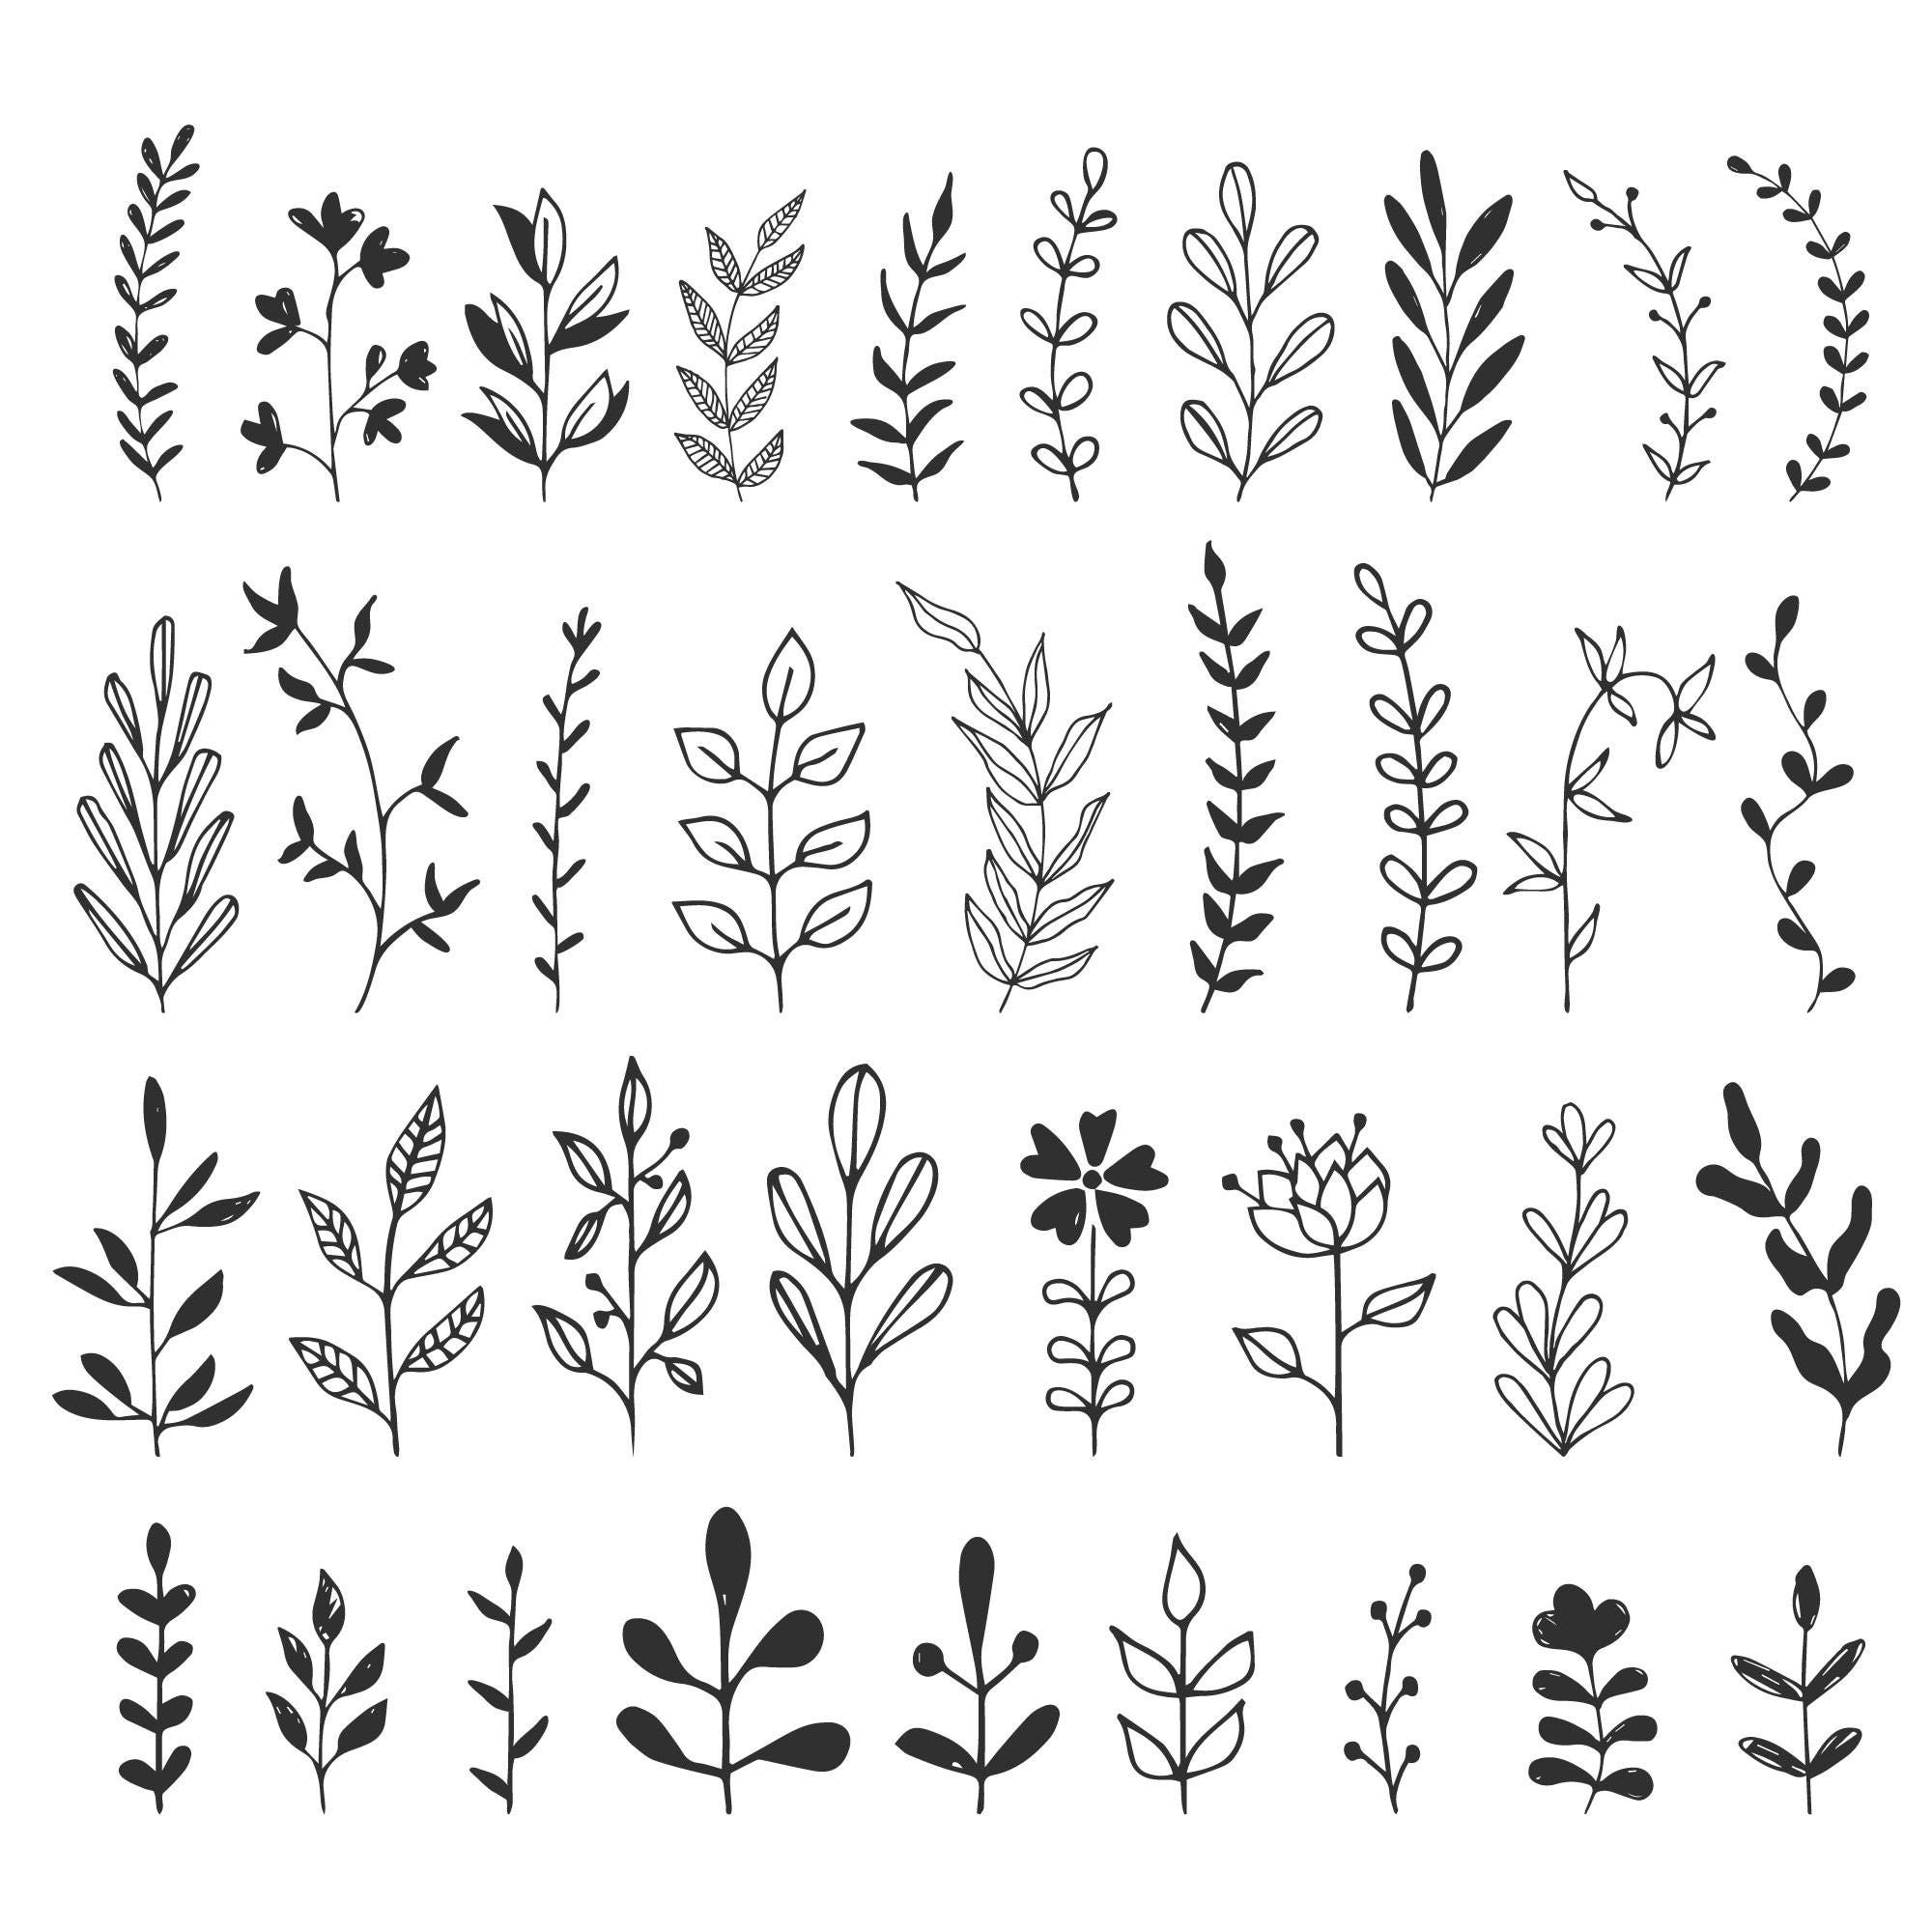 Download Herbs branches flourishes. Svg. DXF. PNG. EPS.